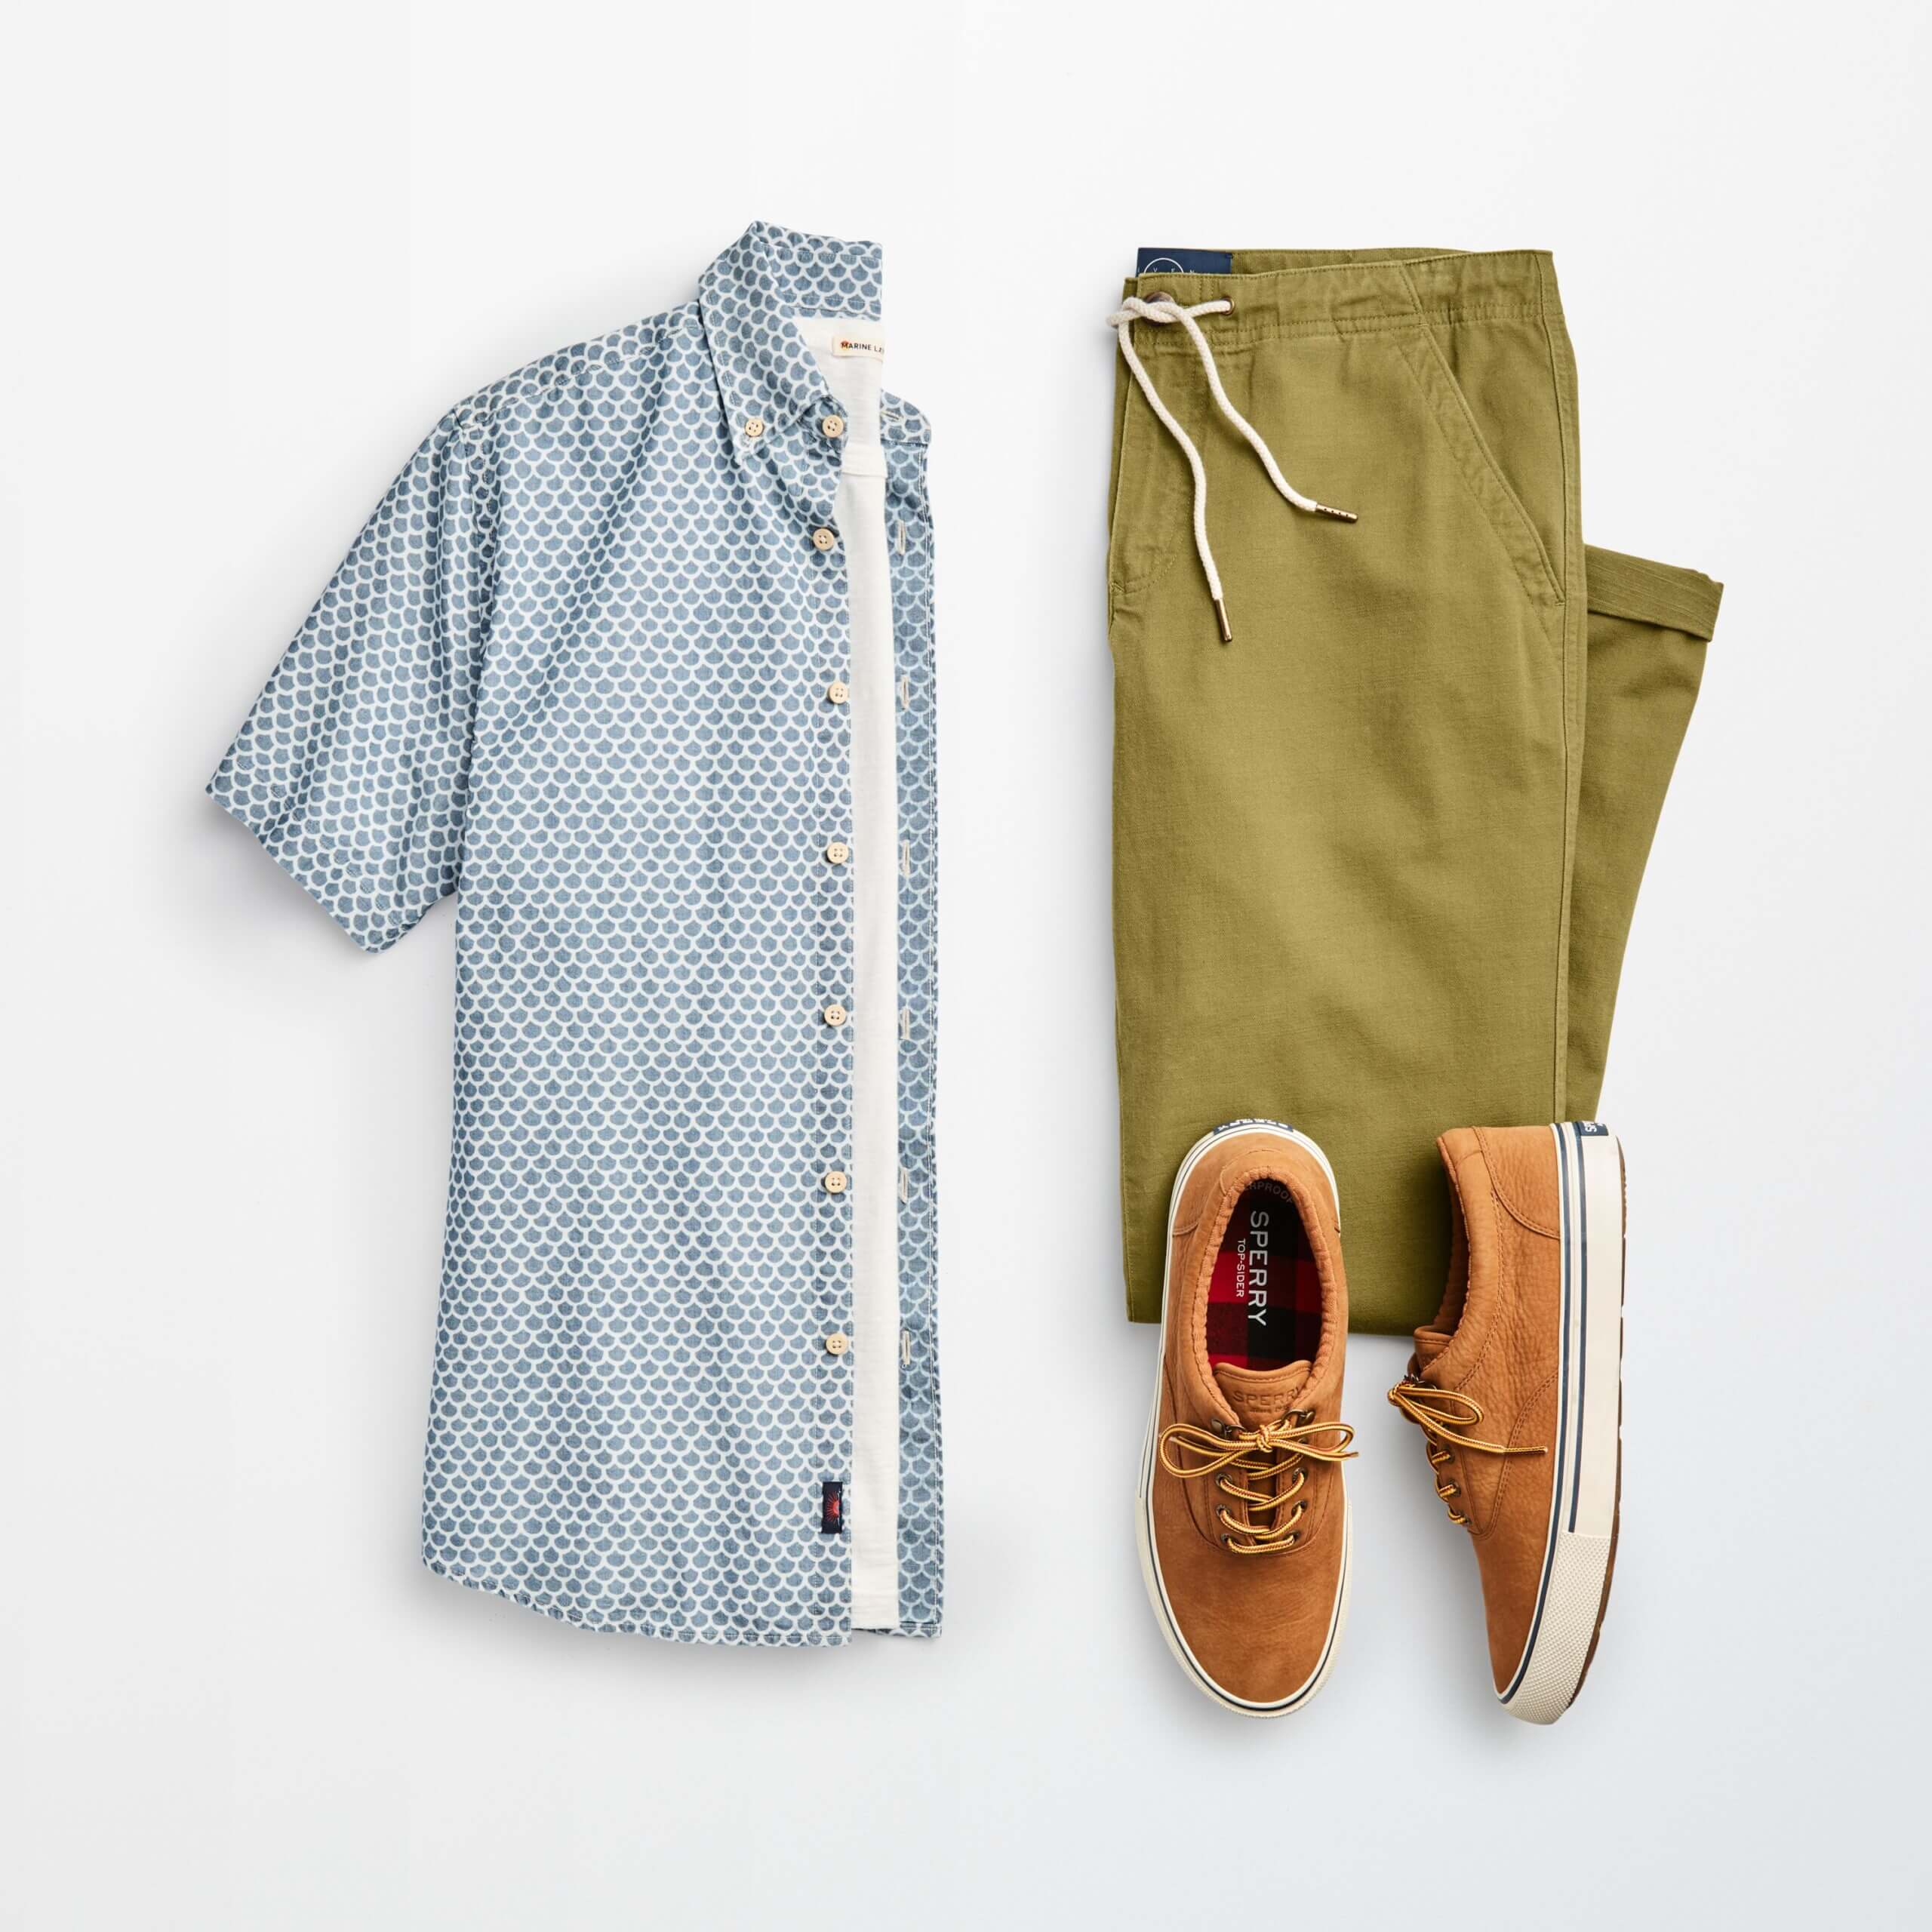 Types of Business Attire for Men | Personal Styling | Stitch Fix